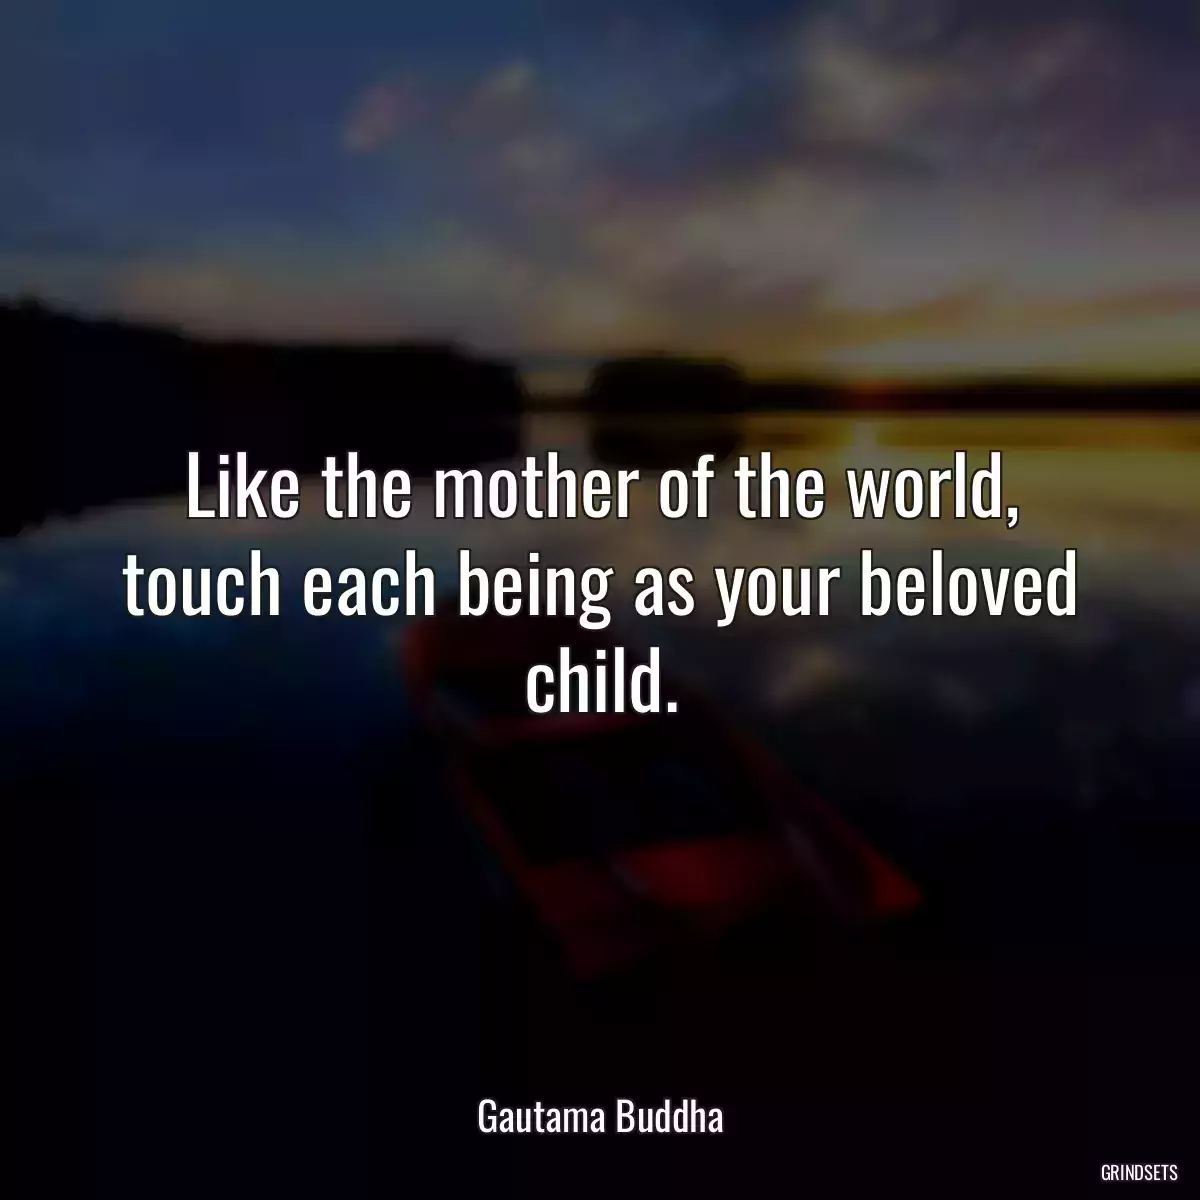 Like the mother of the world, touch each being as your beloved child.